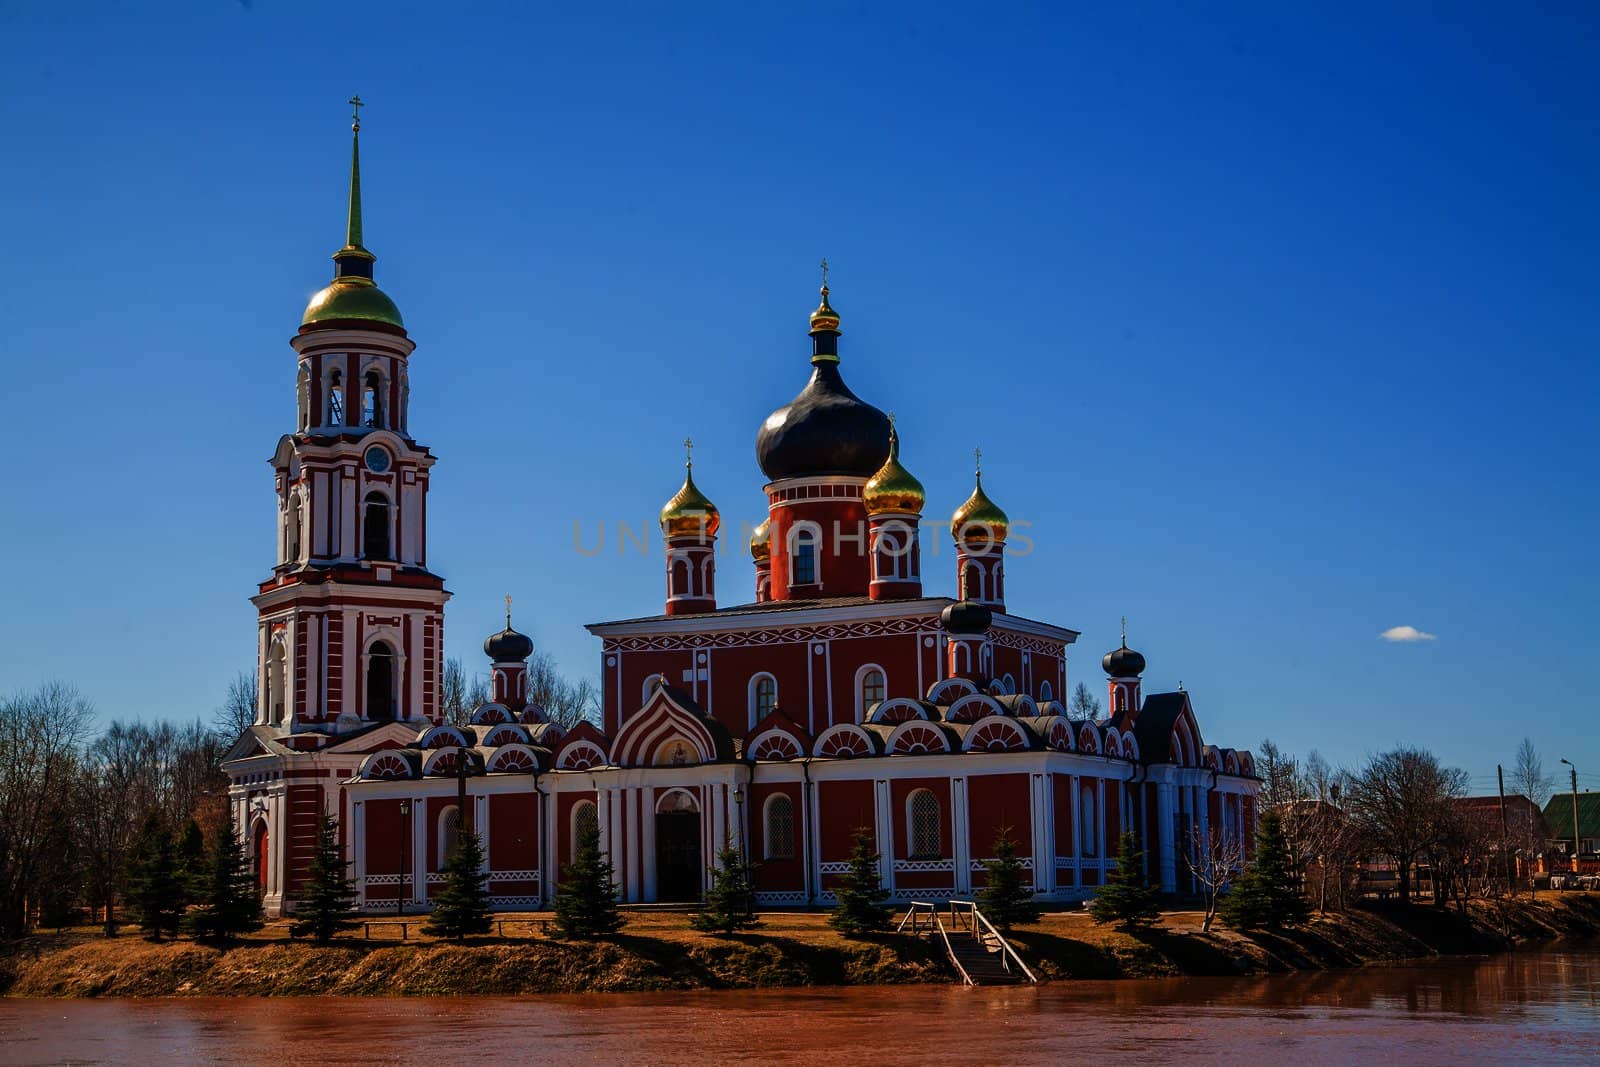 Russian orthodox church on the bank of a river in Staraya Russa